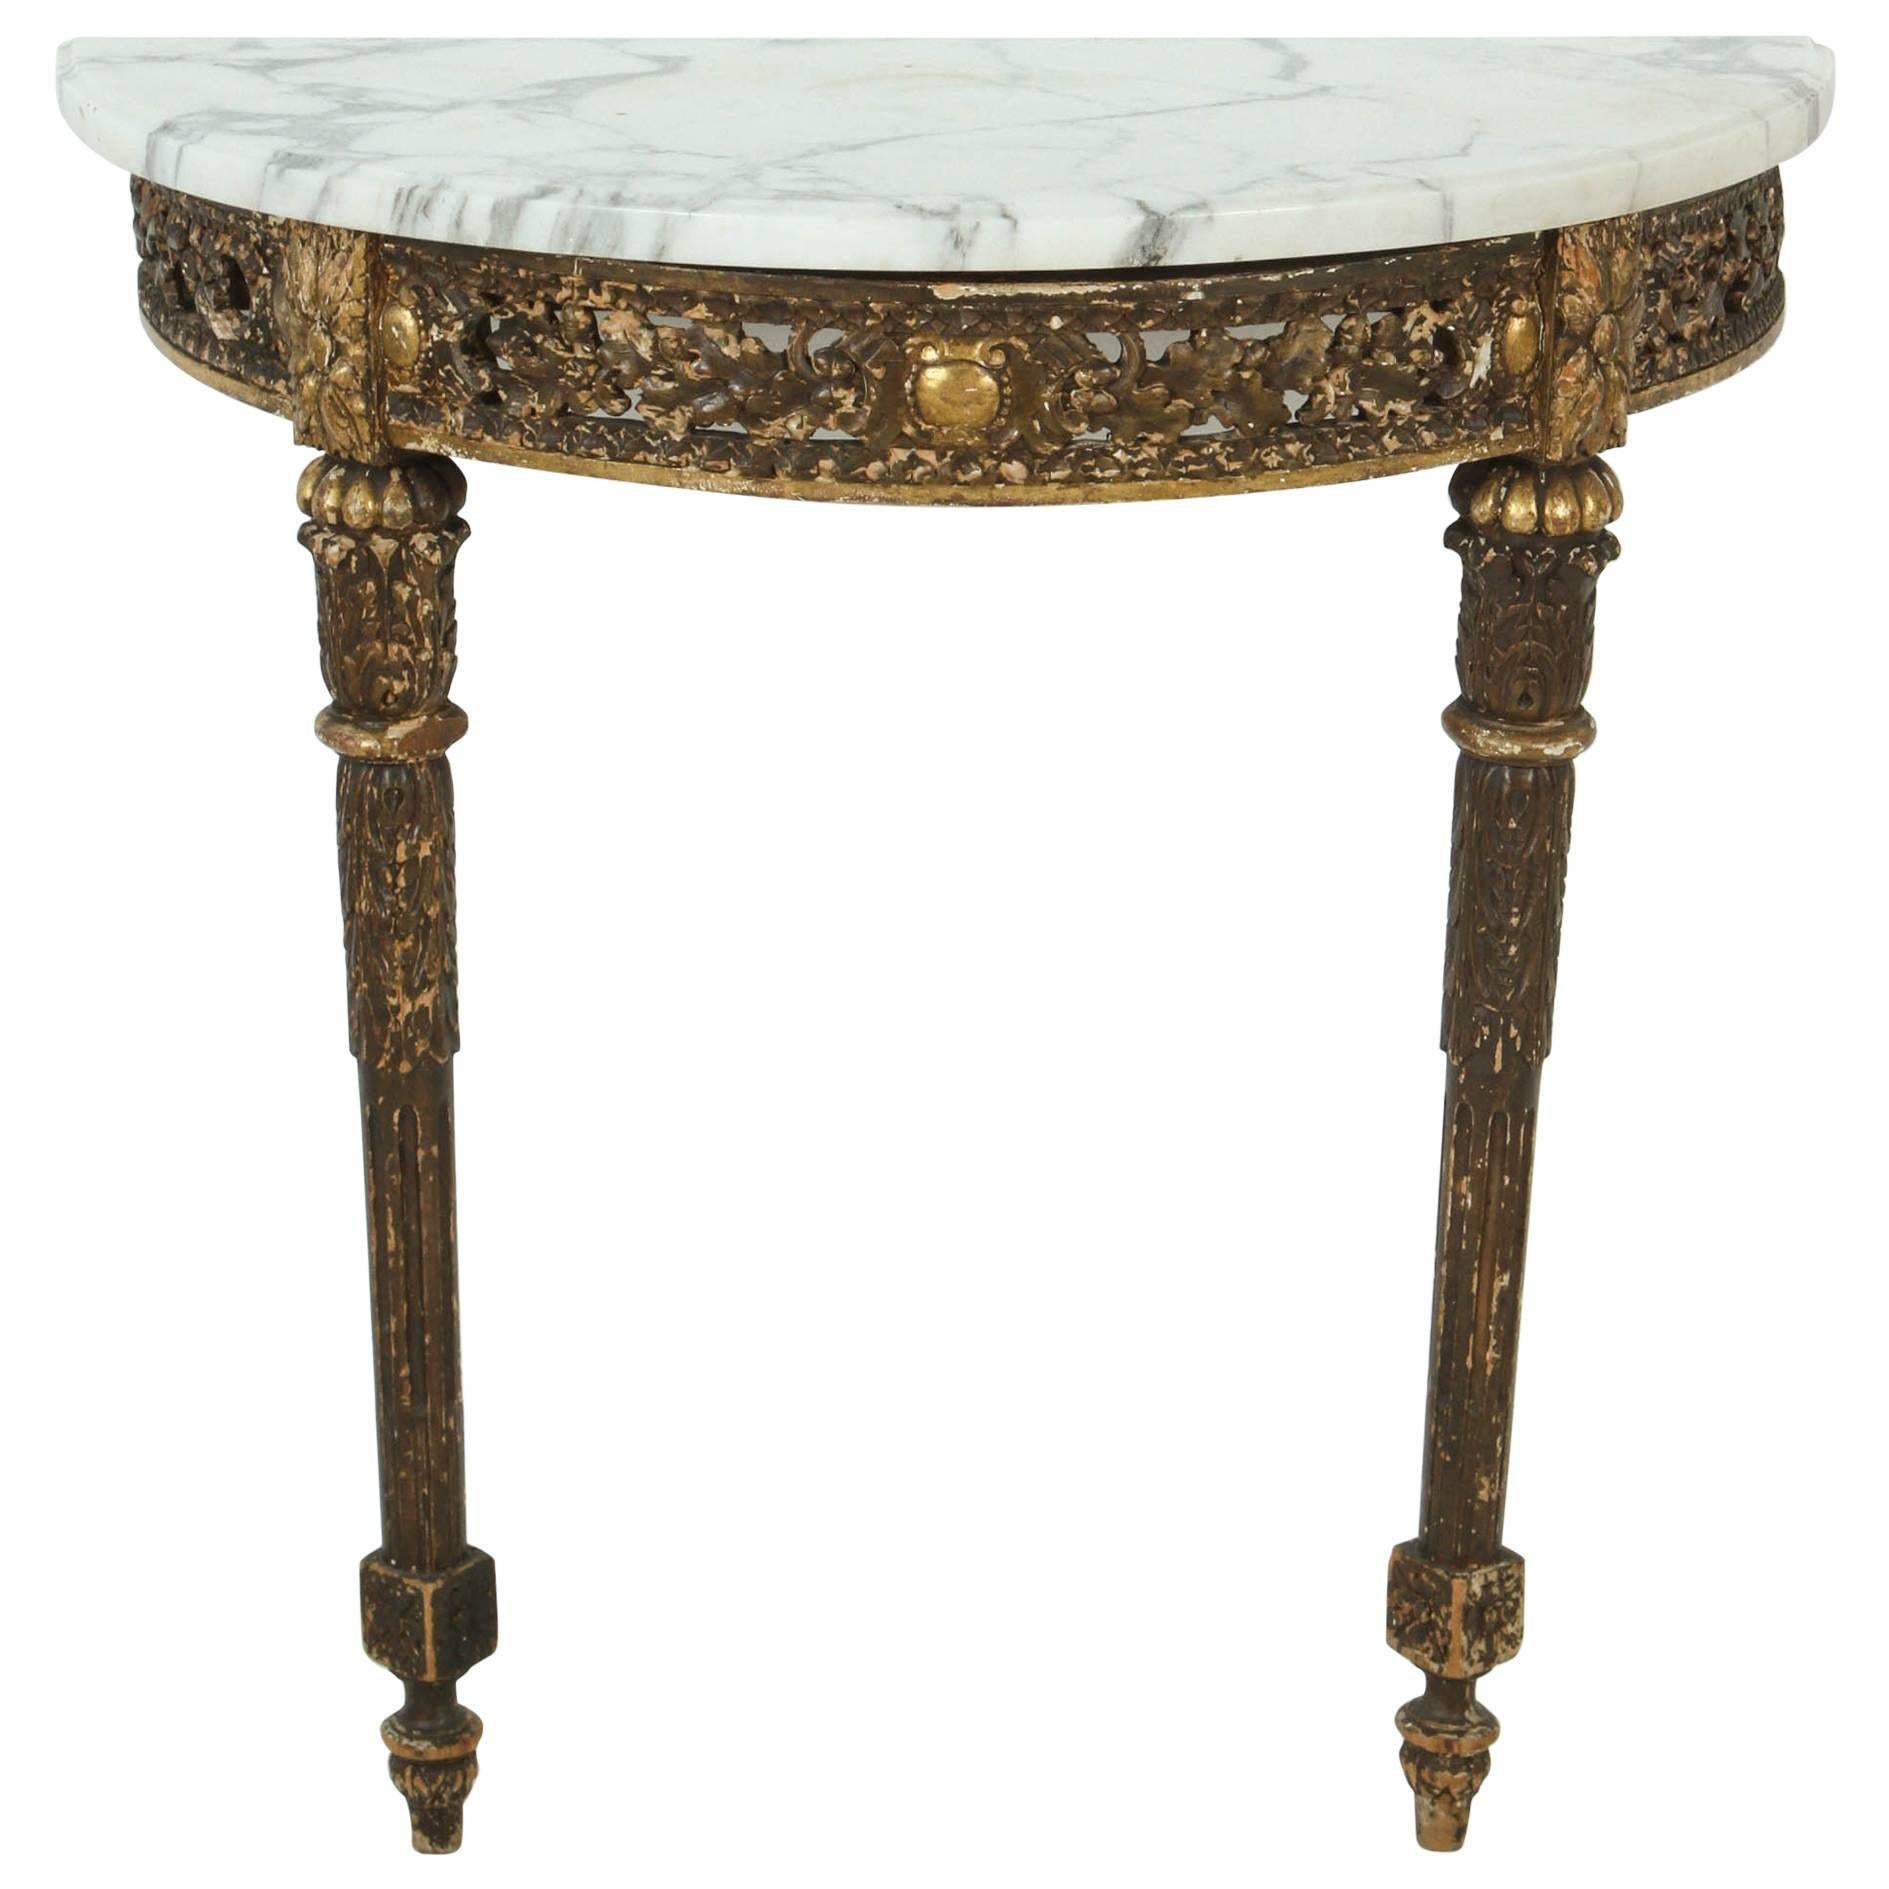 Marble-Topped Demilune Console Table